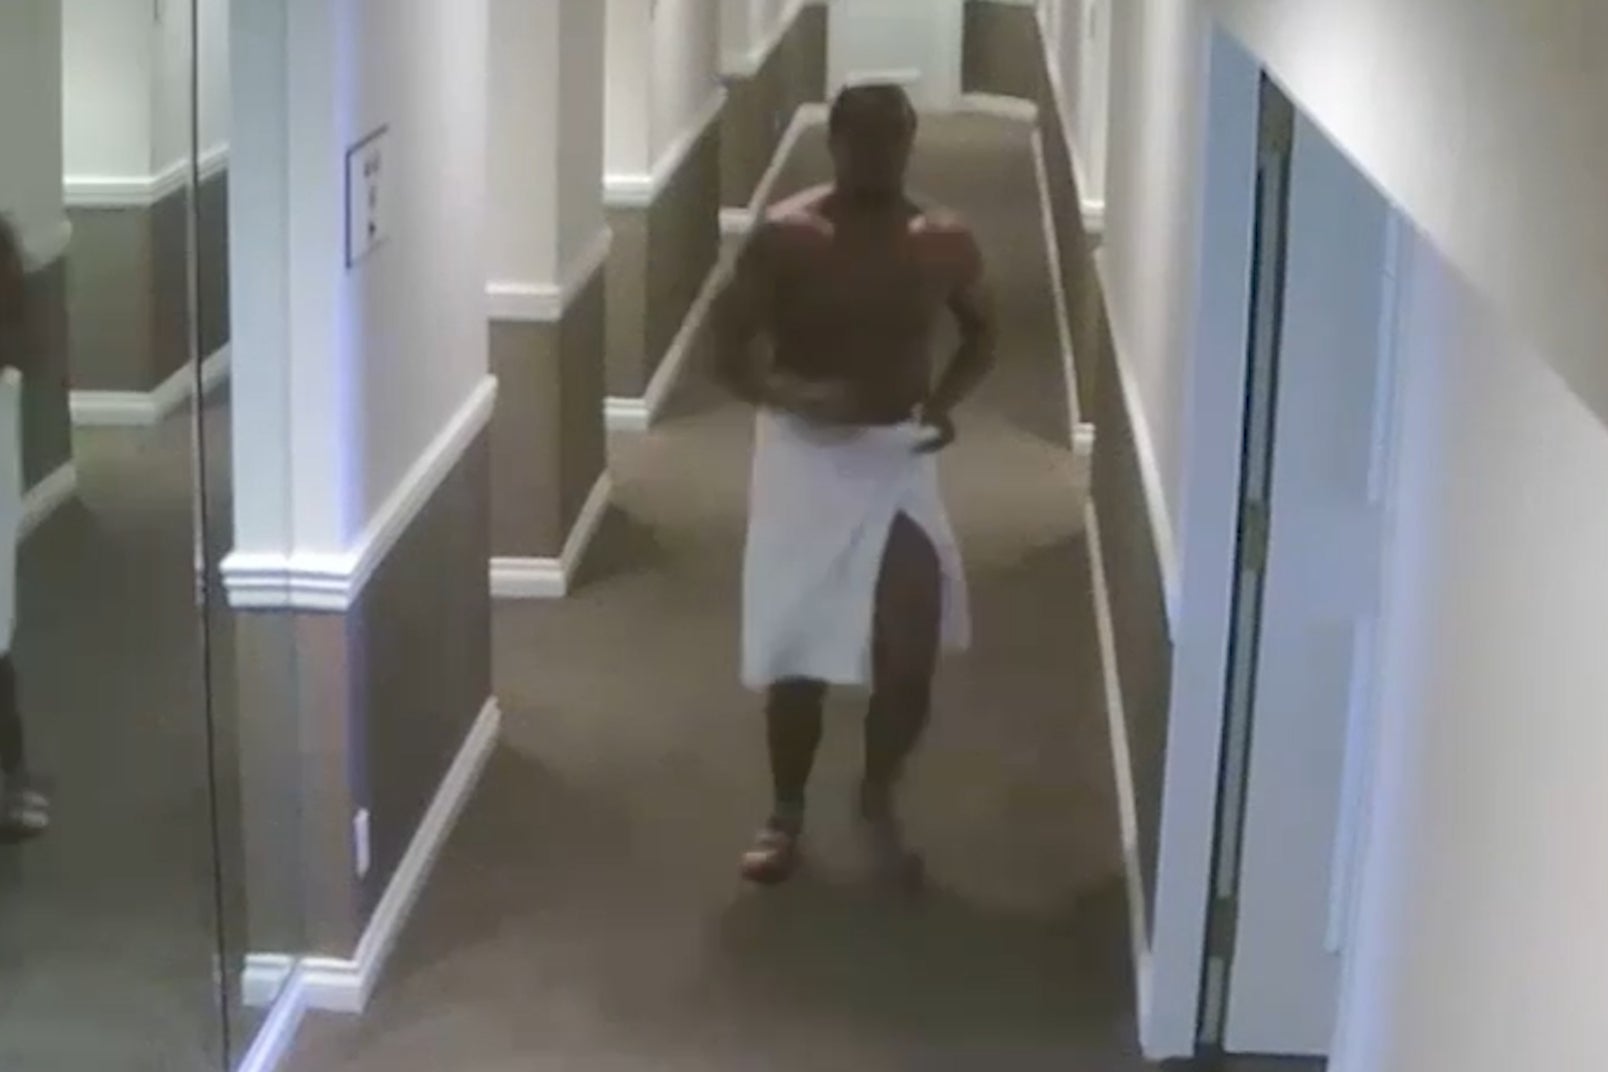 Combs chased Ms Ventura down the corridor towards the elevators before the attack, wearing only a towel and socks